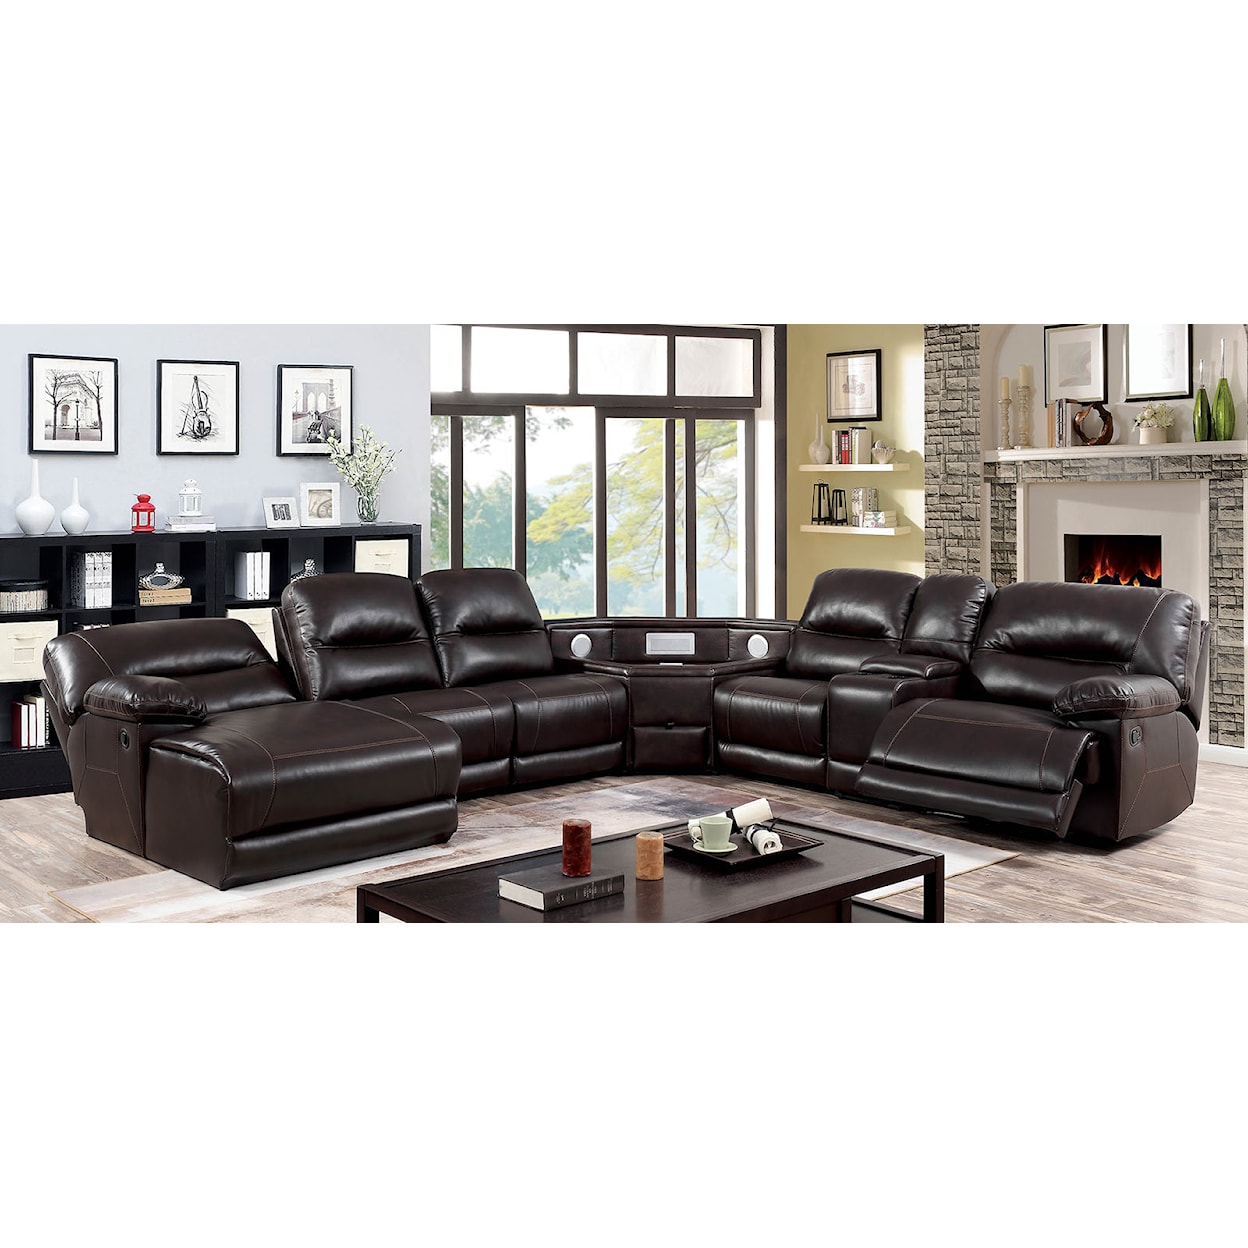 Furniture of America Glasgow Sectional 